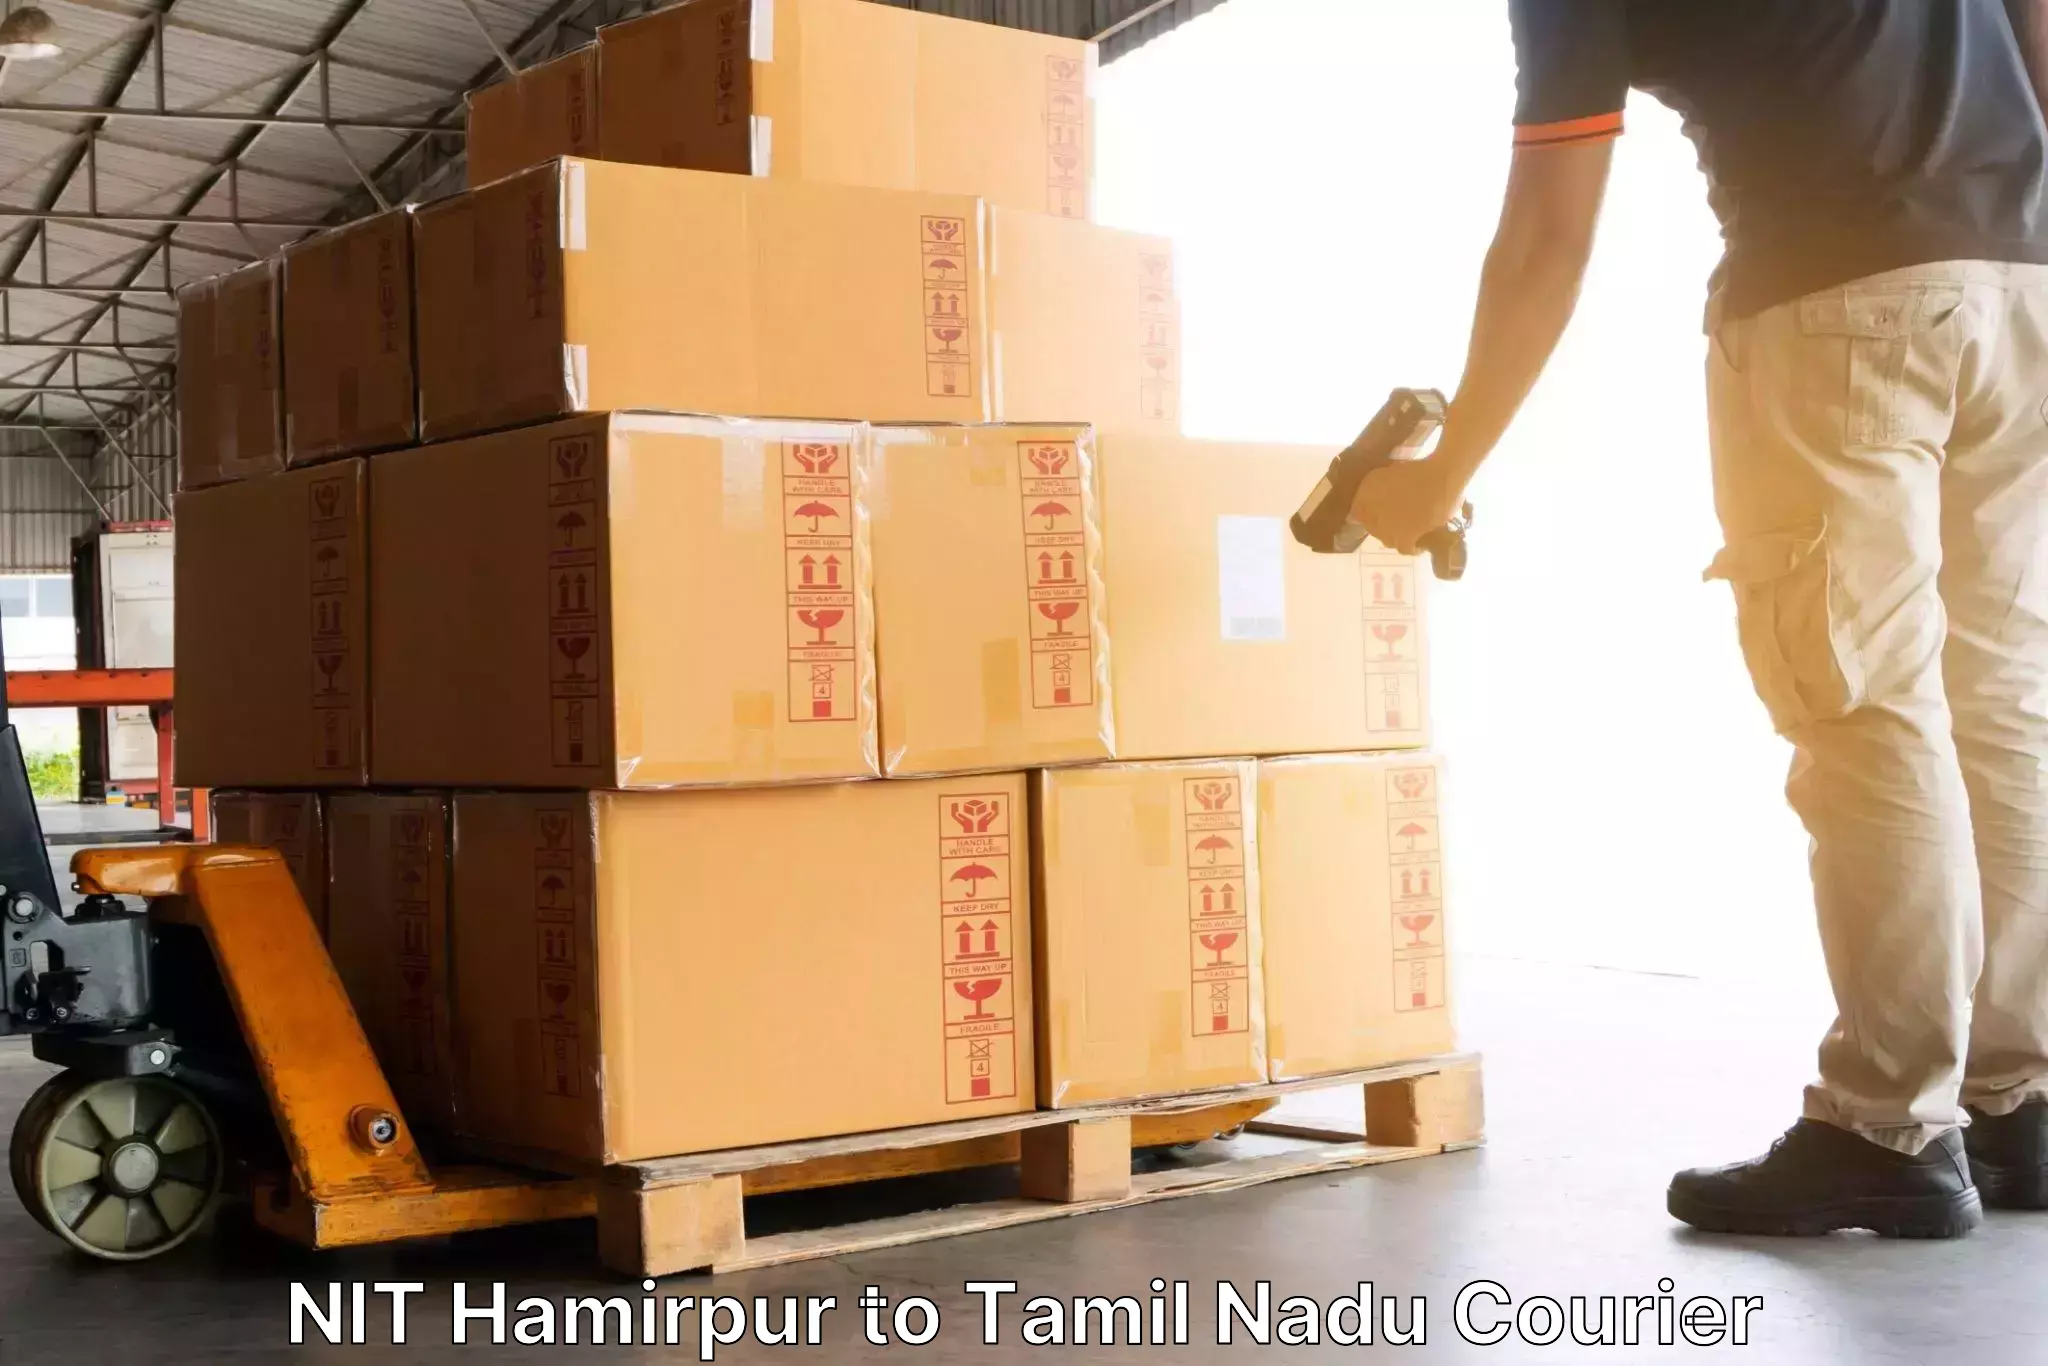 Modern delivery methods in NIT Hamirpur to Vellore